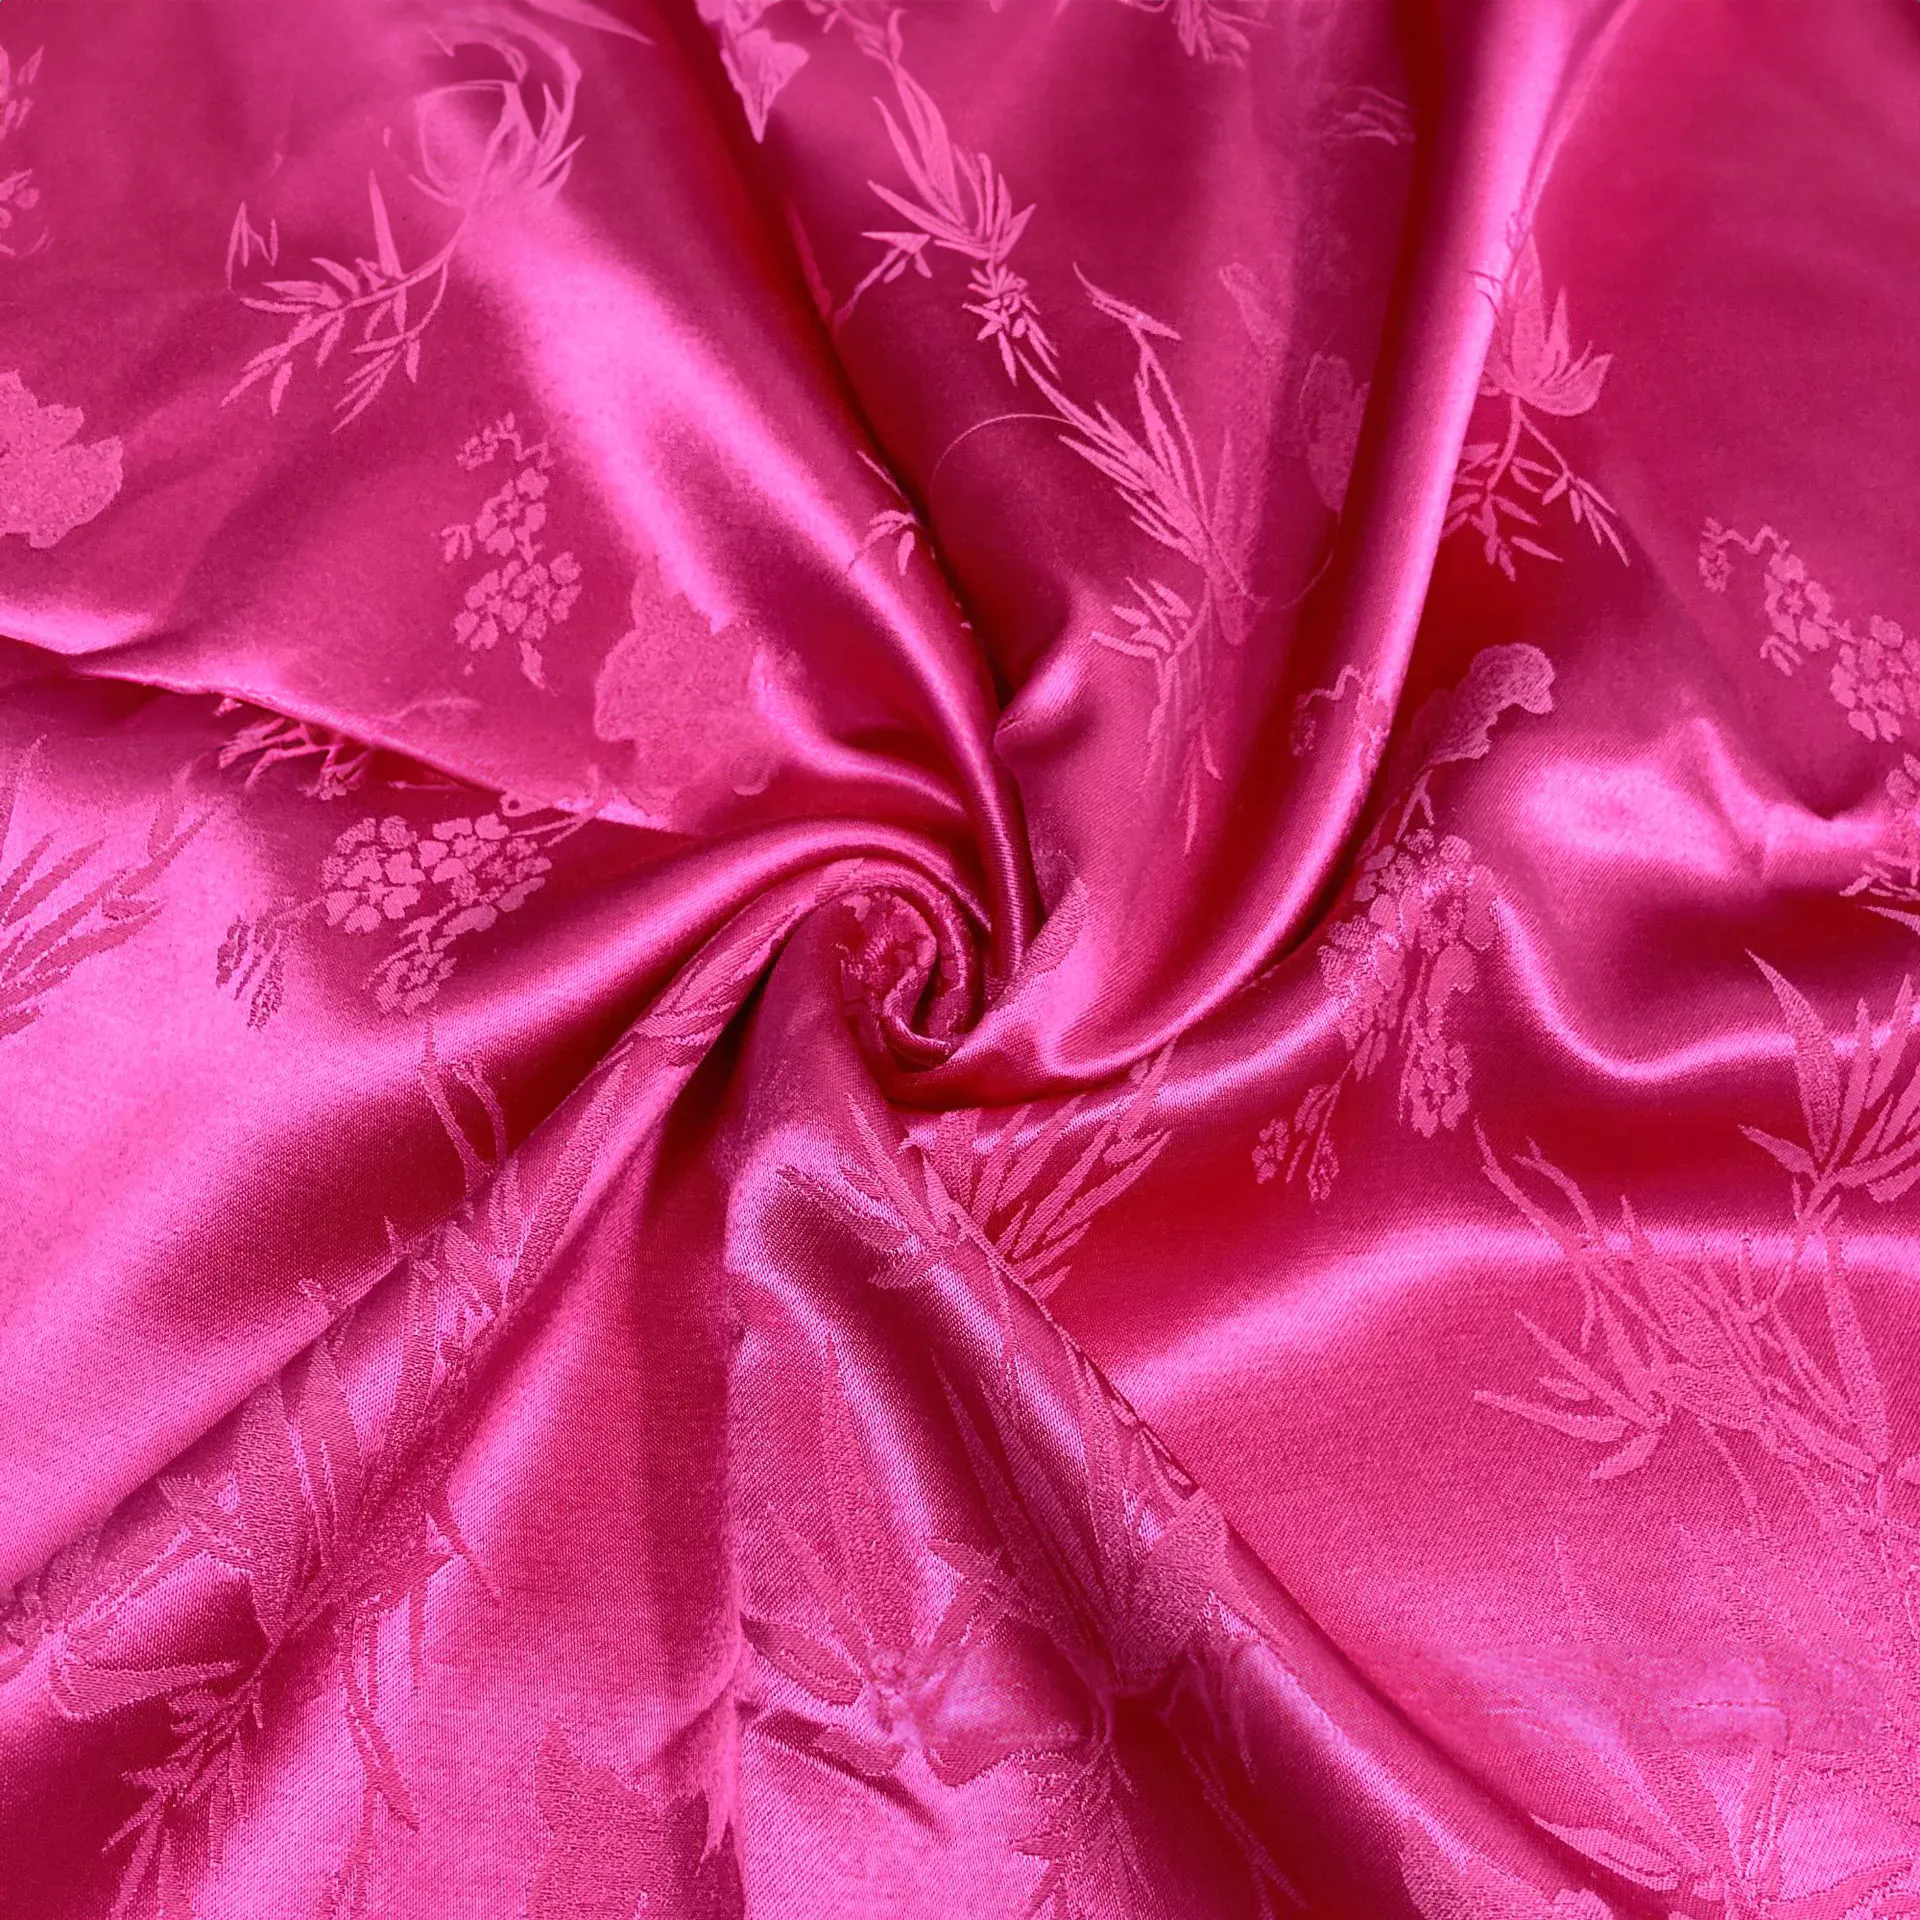 Satin Smooth Brocade Jacquard Fabric with Bamboo Leaf Patterns01